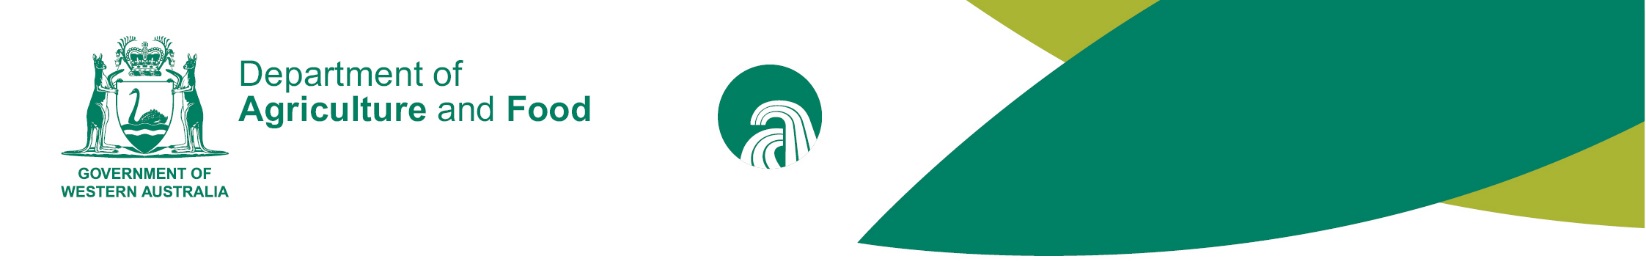 department of agriculture and food, western australia logo on the left. graphic element of leaves on the right.